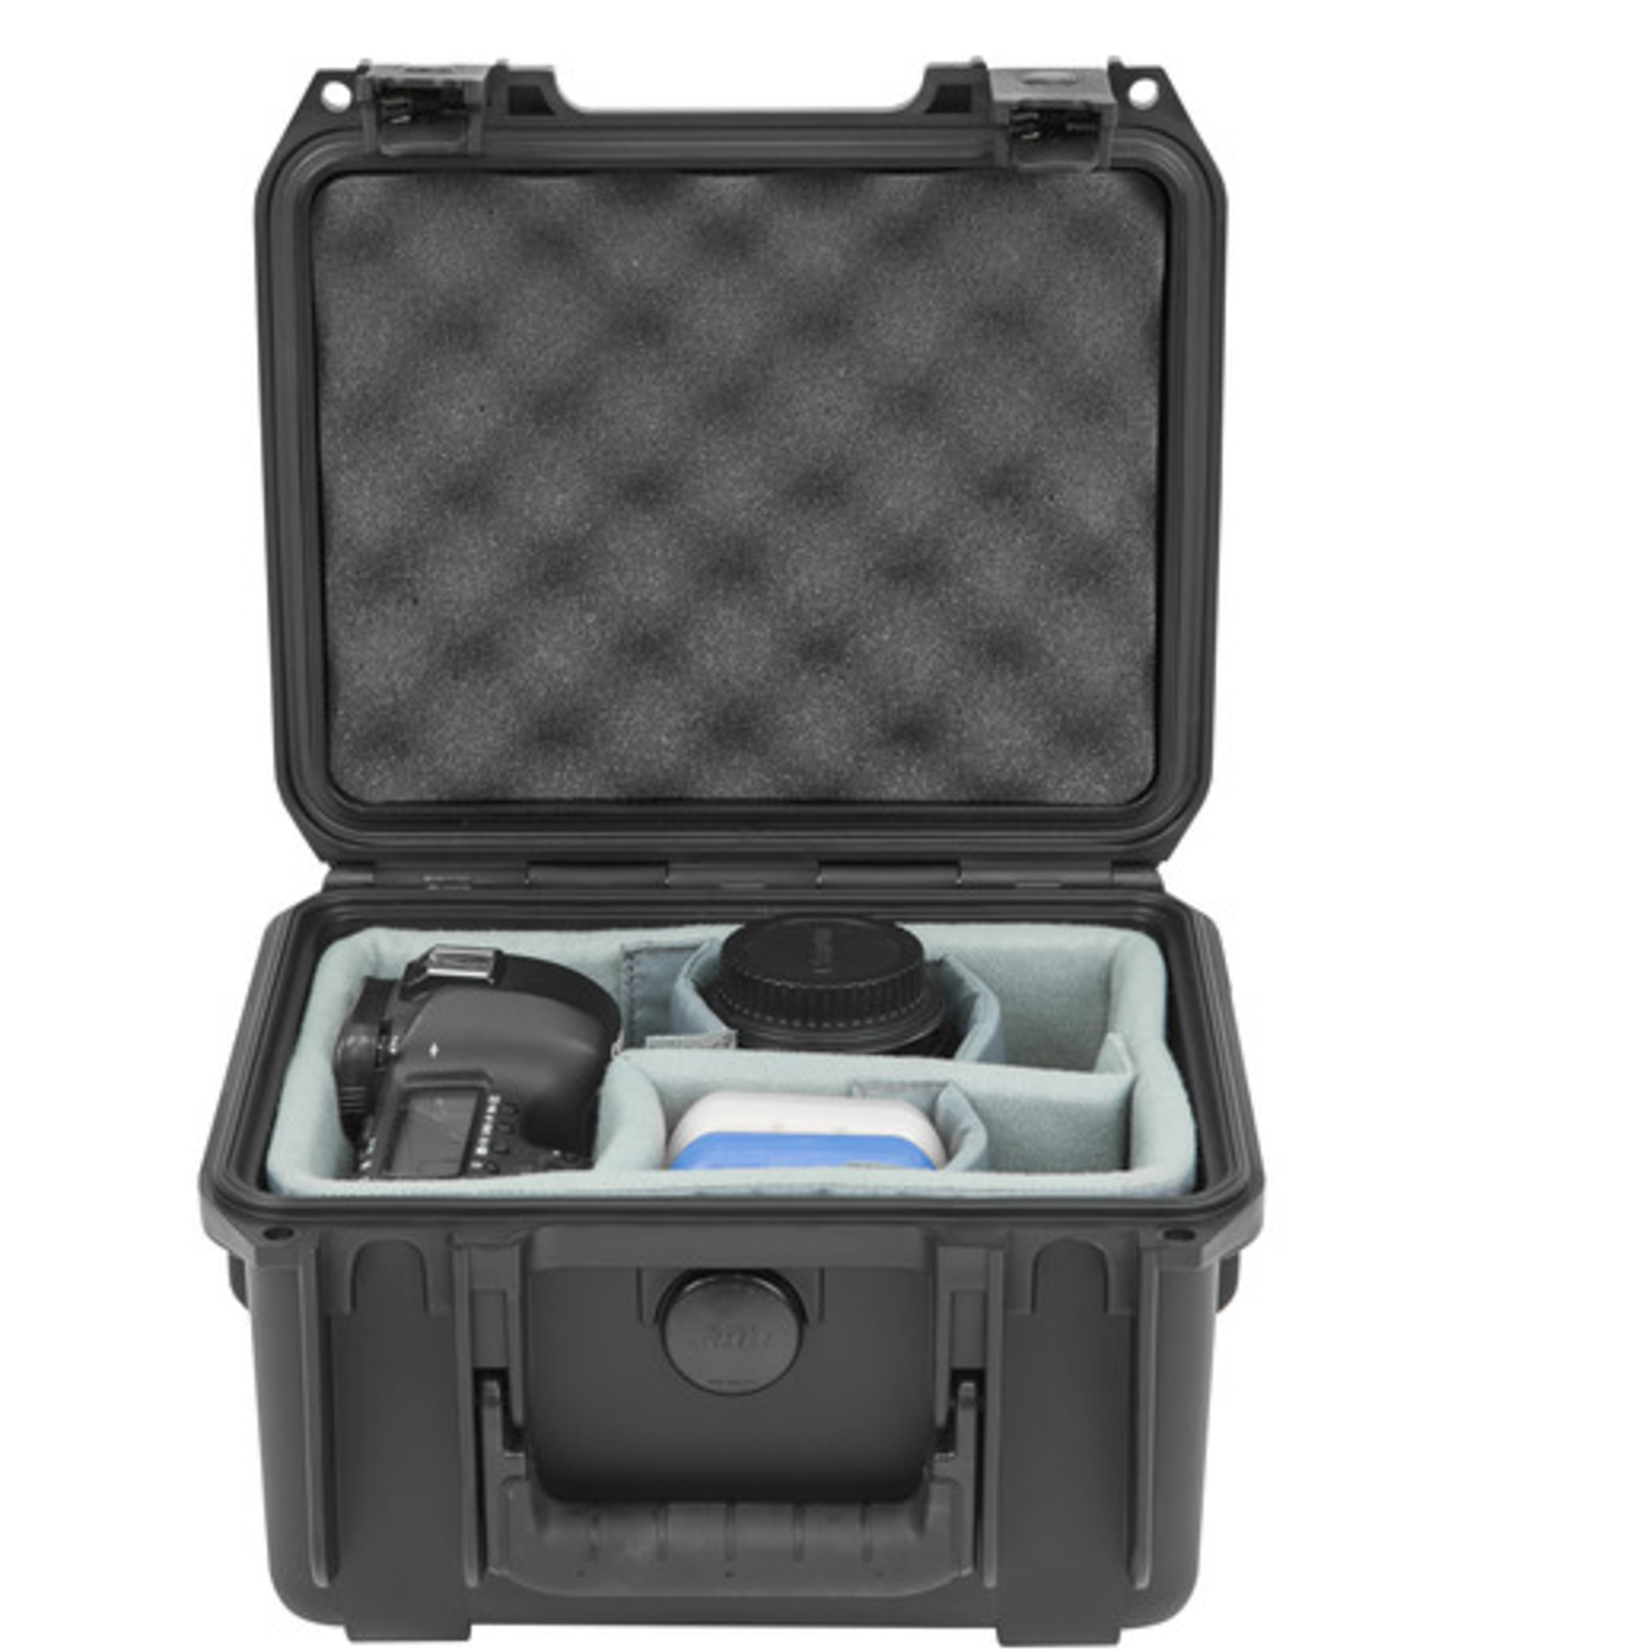 SKB Cases SKB iSeries 0907-6 Case with Think Tank Photo Dividers & Lid Foam (Black)